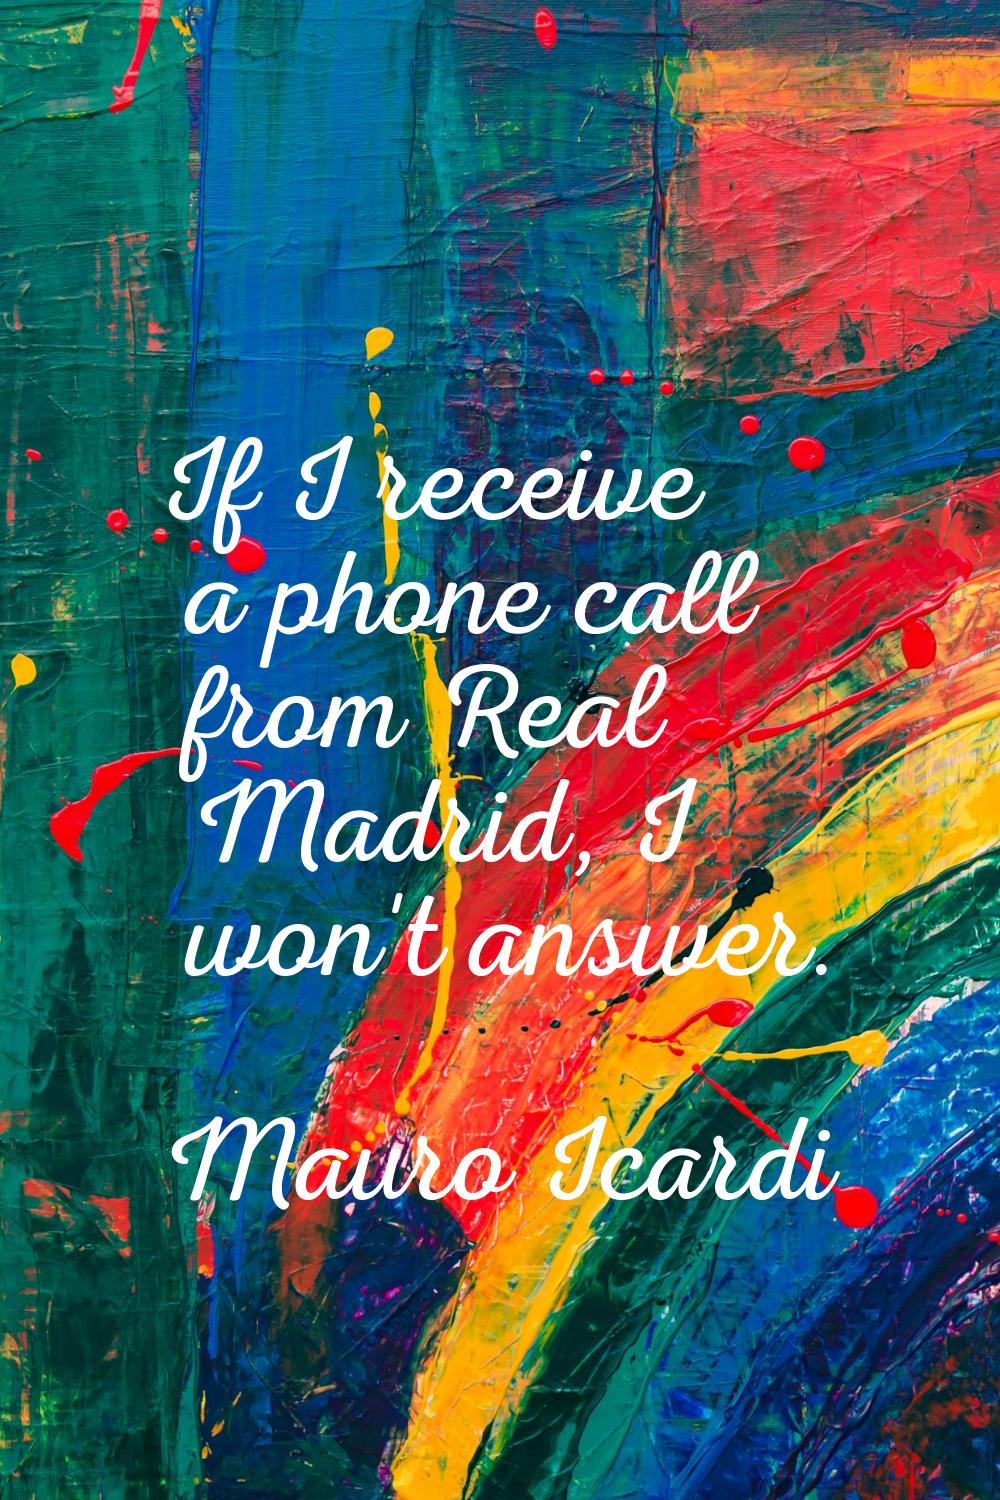 If I receive a phone call from Real Madrid, I won't answer.